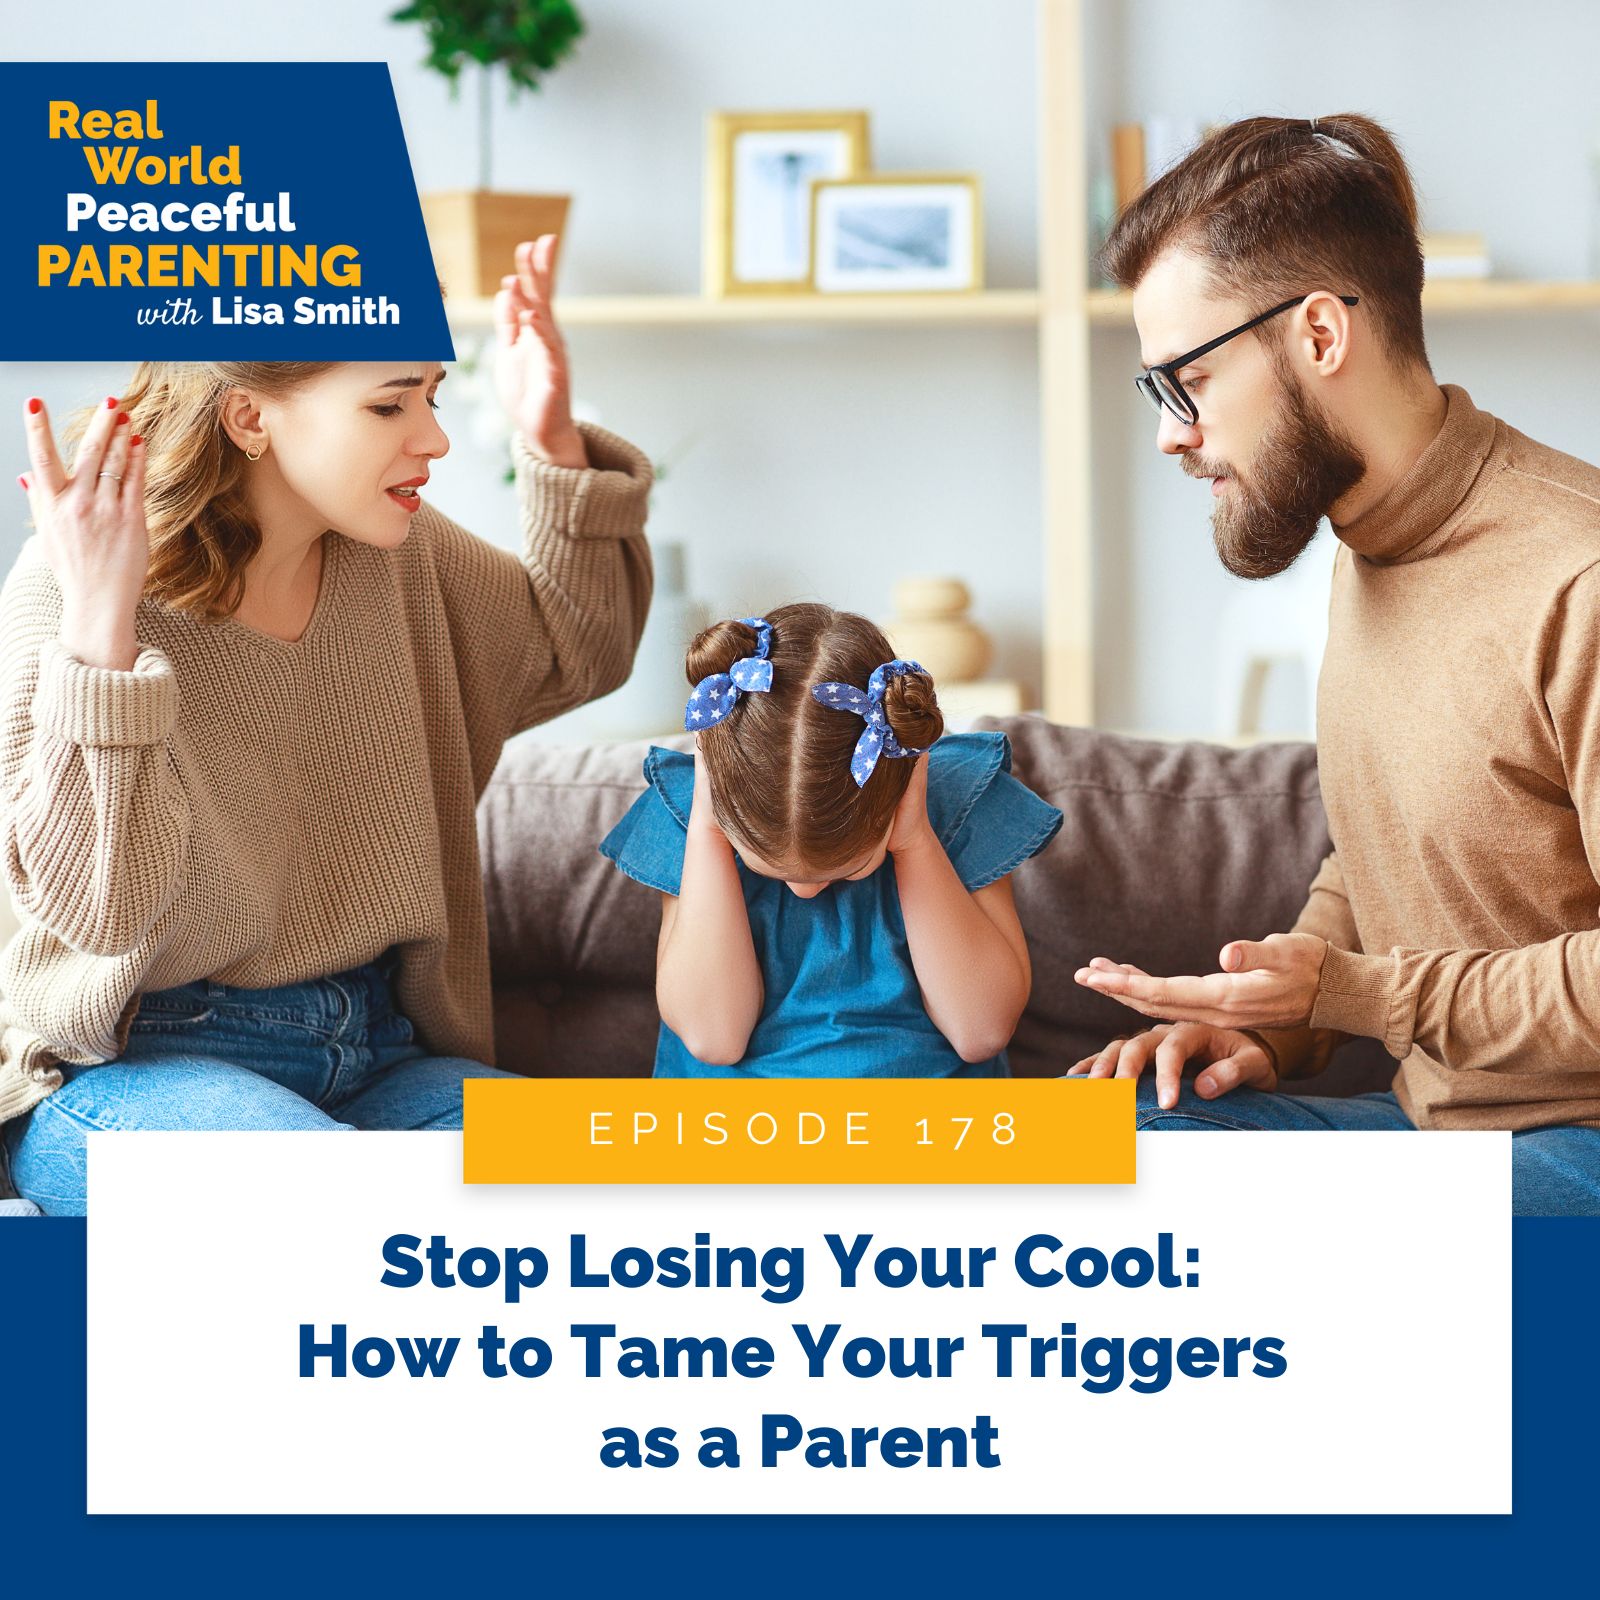 Real World Peaceful Parenting with Lisa Smith | Stop Losing Your Cool: How to Tame Your Triggers as a Parent